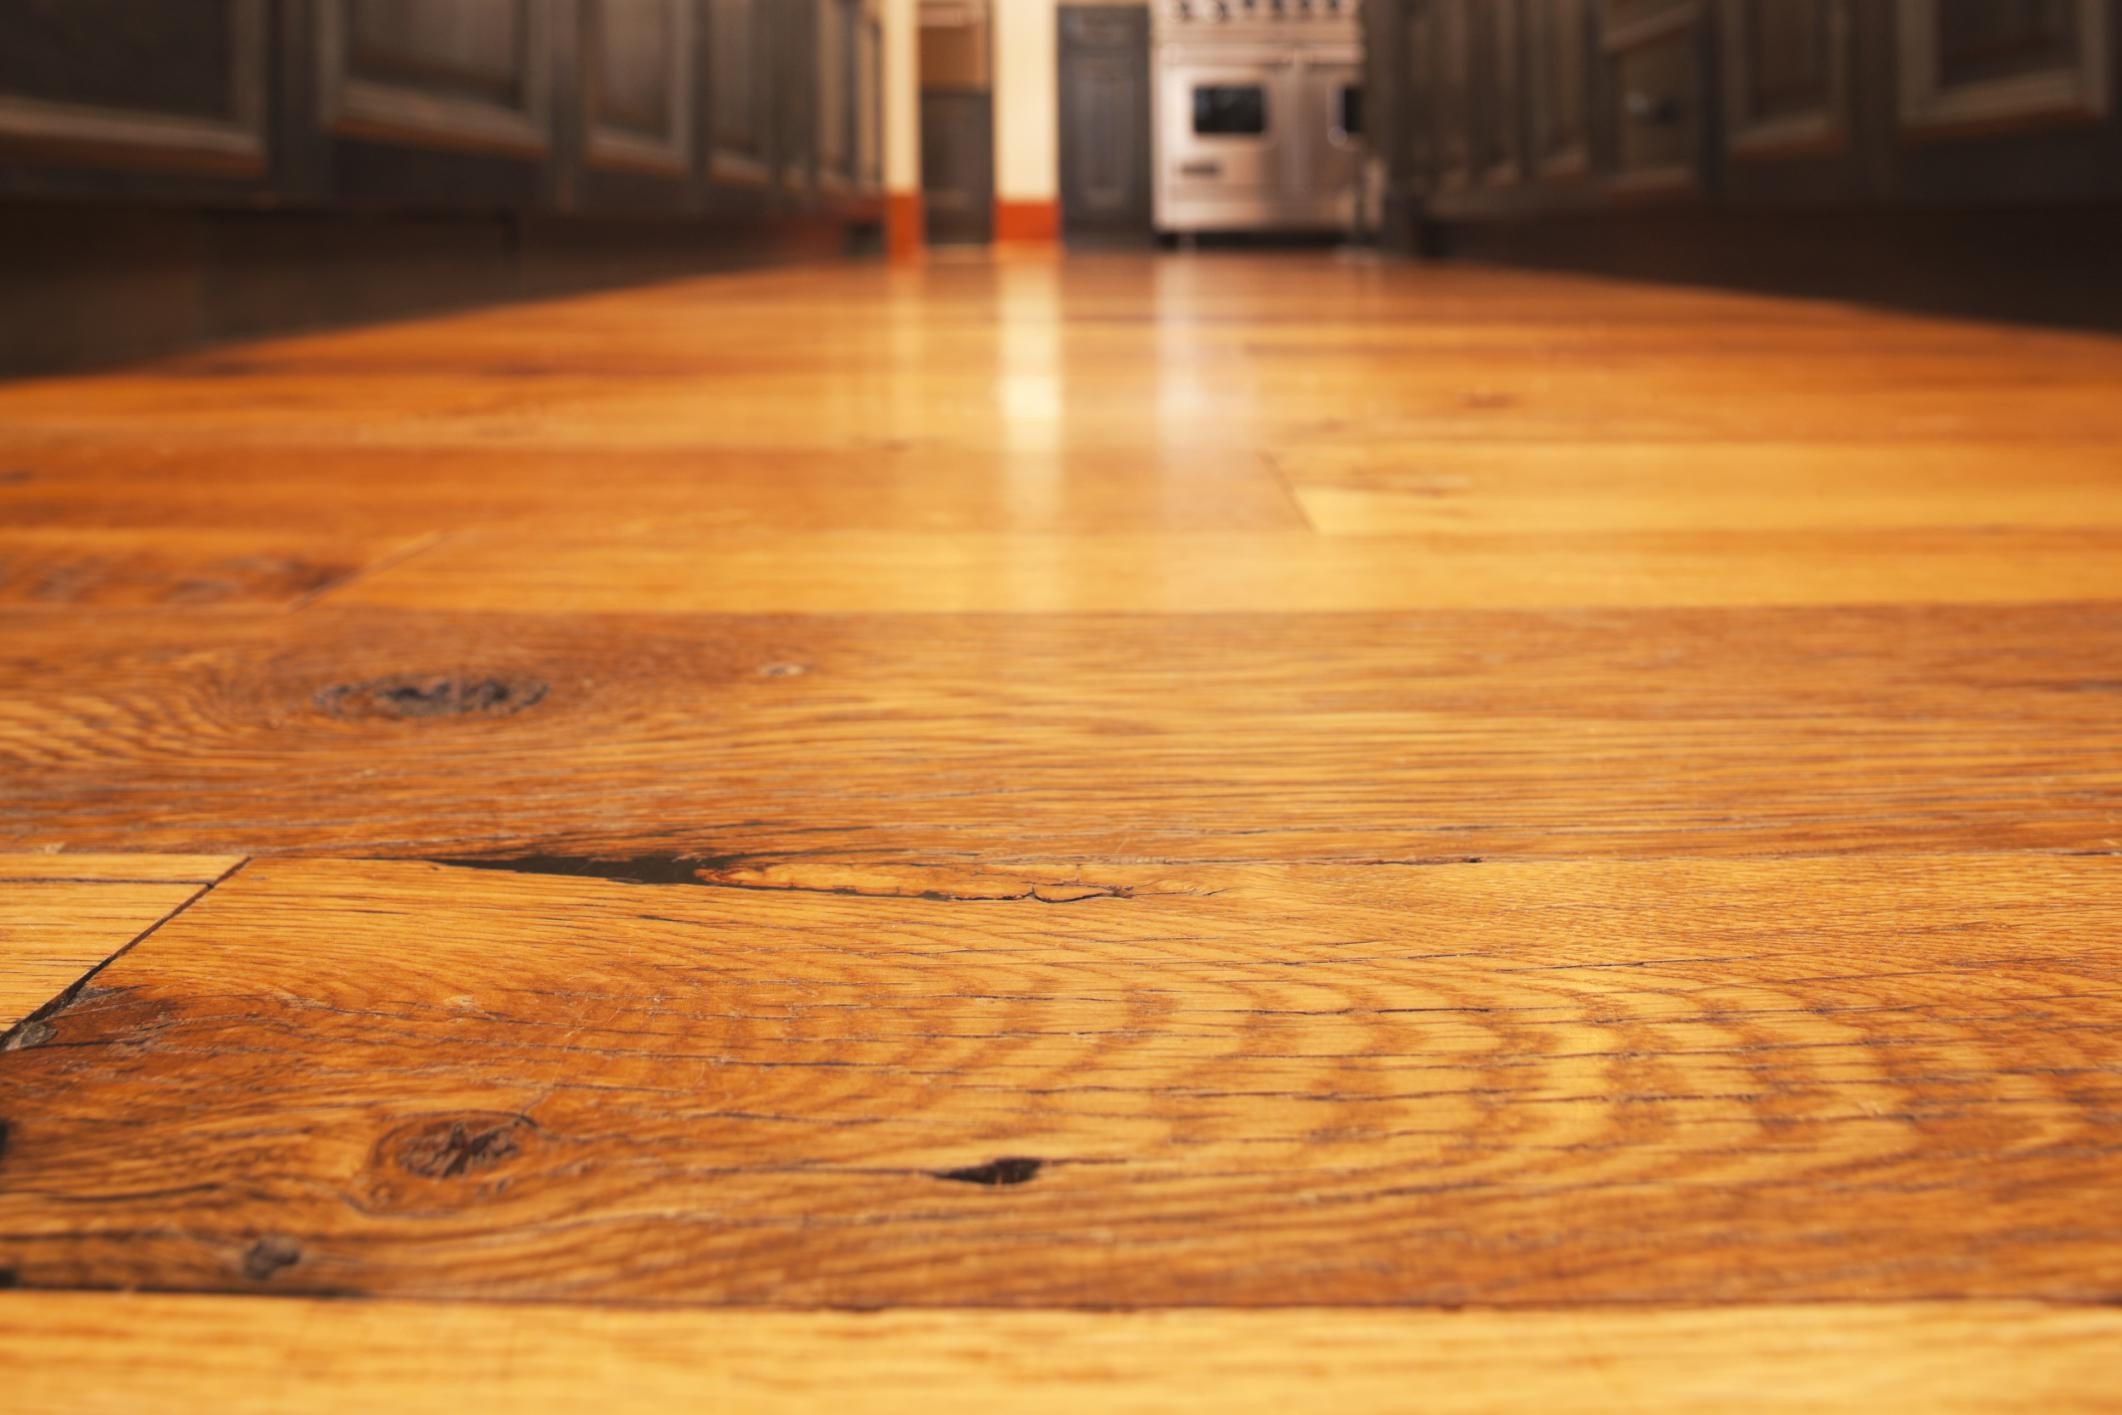 16 Perfect How Much Does It Cost to Refinish Hardwood Floors Myself 2024 free download how much does it cost to refinish hardwood floors myself of how to sand hardwood floors in 185126347 56a49f3d5f9b58b7d0d7e154